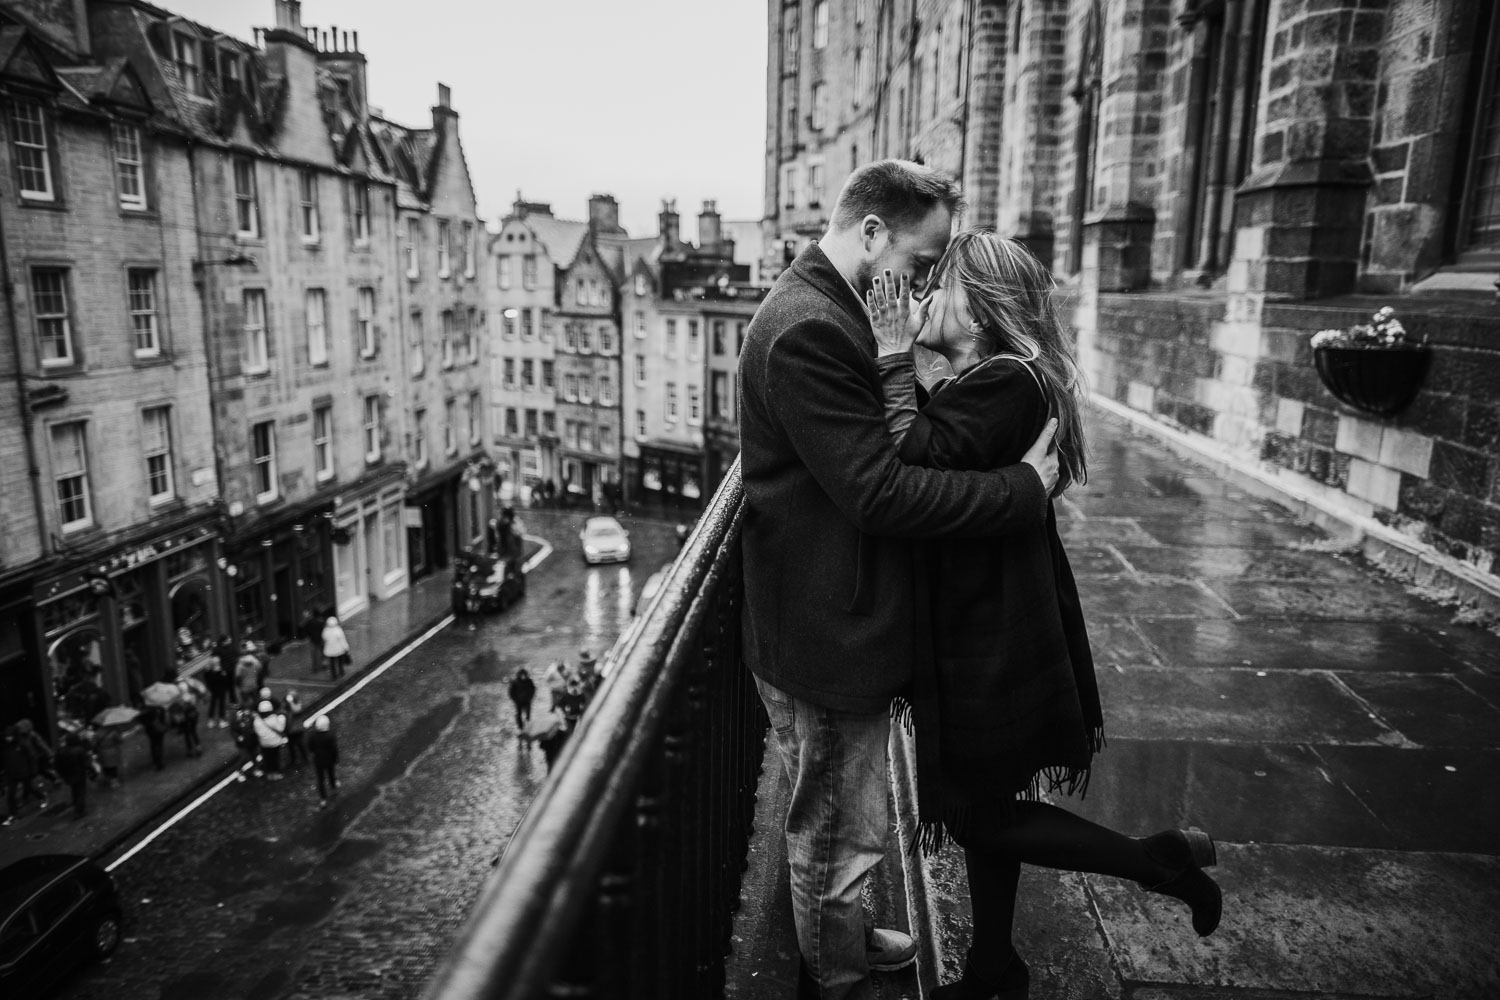 Moody spring engagement session in Old Town of Edinburgh, Scotland. Royal Mile rainy engagement.